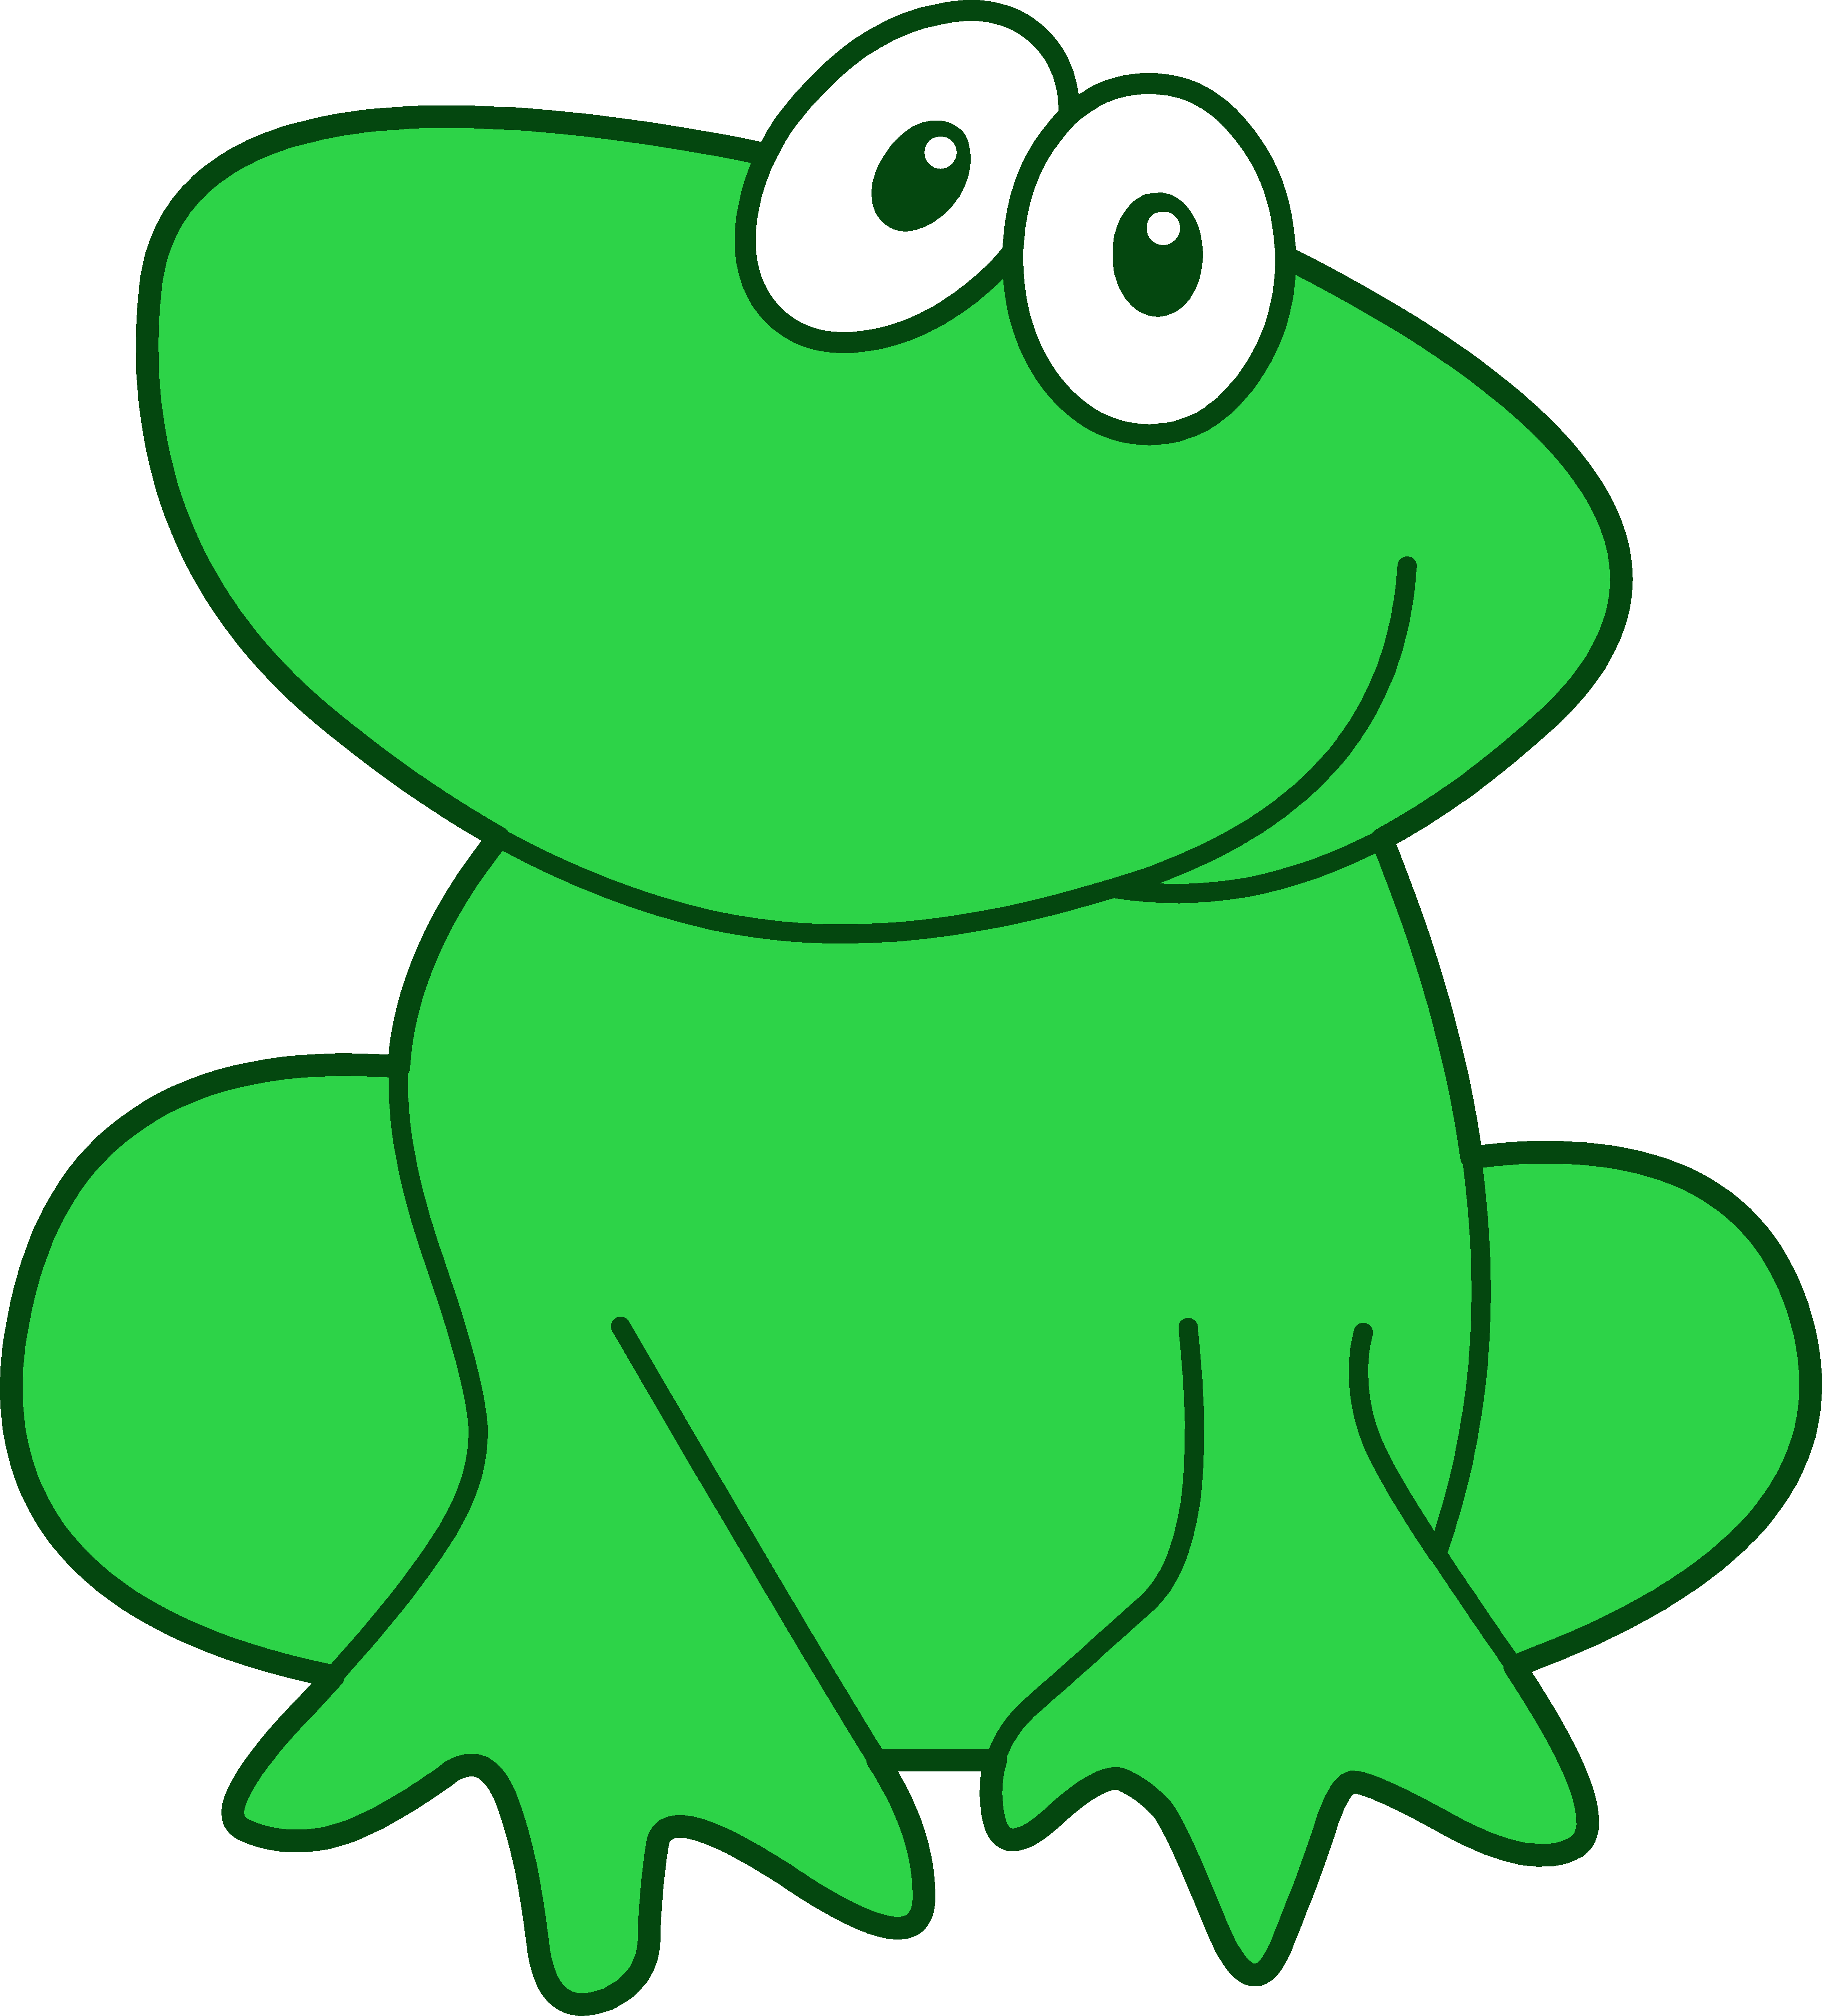 Cute little green frog. Toad clipart baby